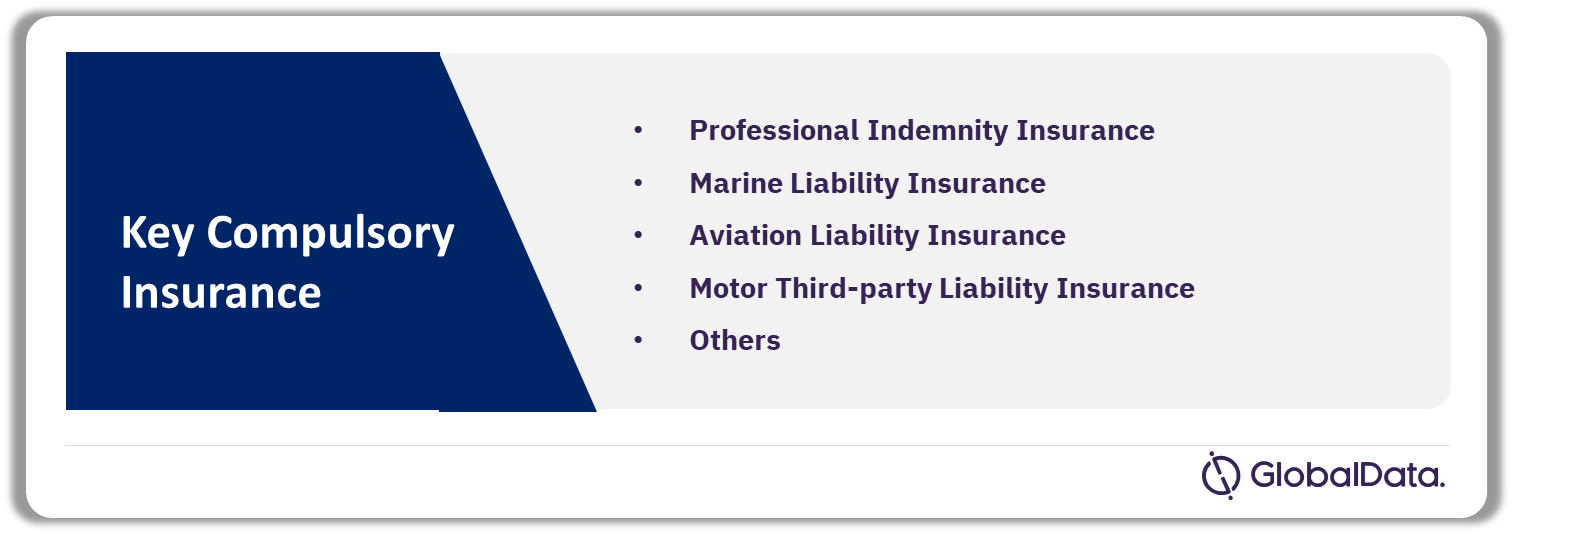 Guinea Insurance Industry Analysis by Compulsory Insurances